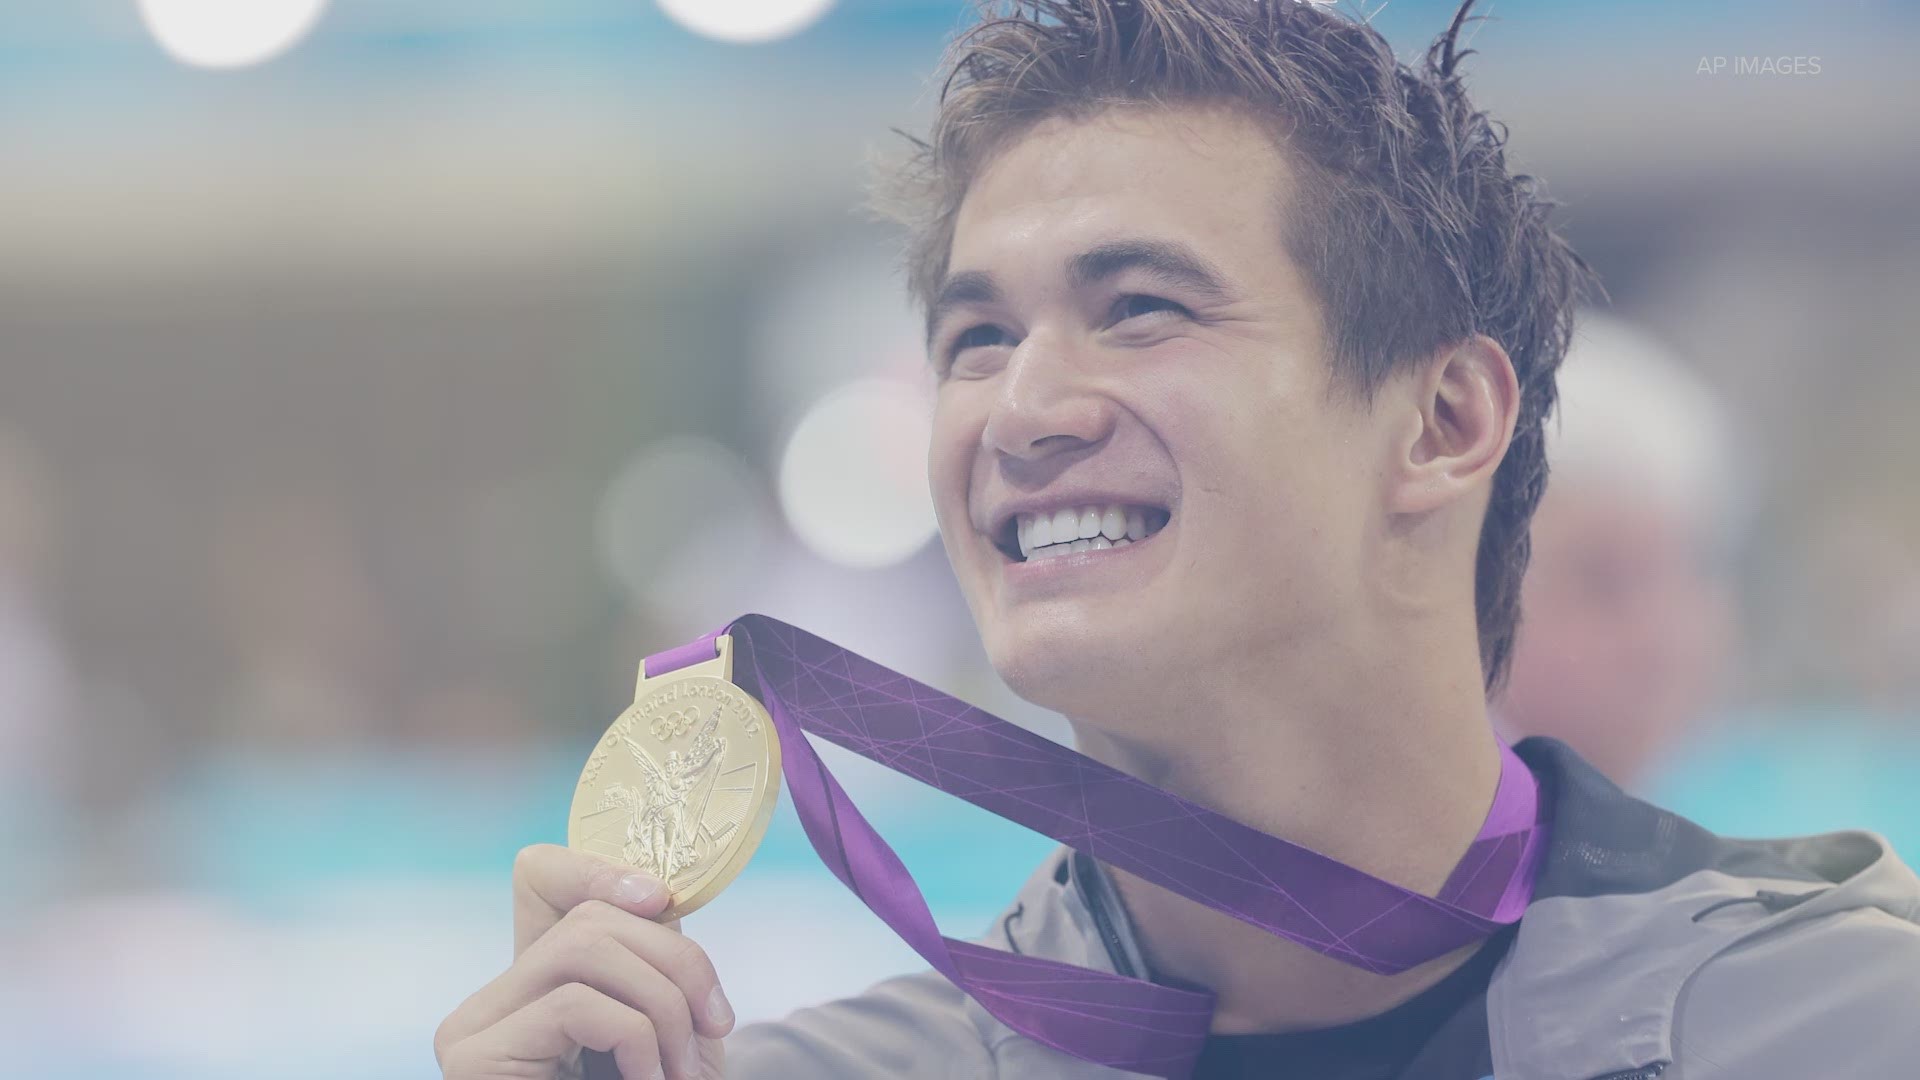 Nathan Adrian, who has battled cancer, is hoping to qualify for his fourth Olympics. The USA swimming trials are taking place this week in Omaha, Nebraska.